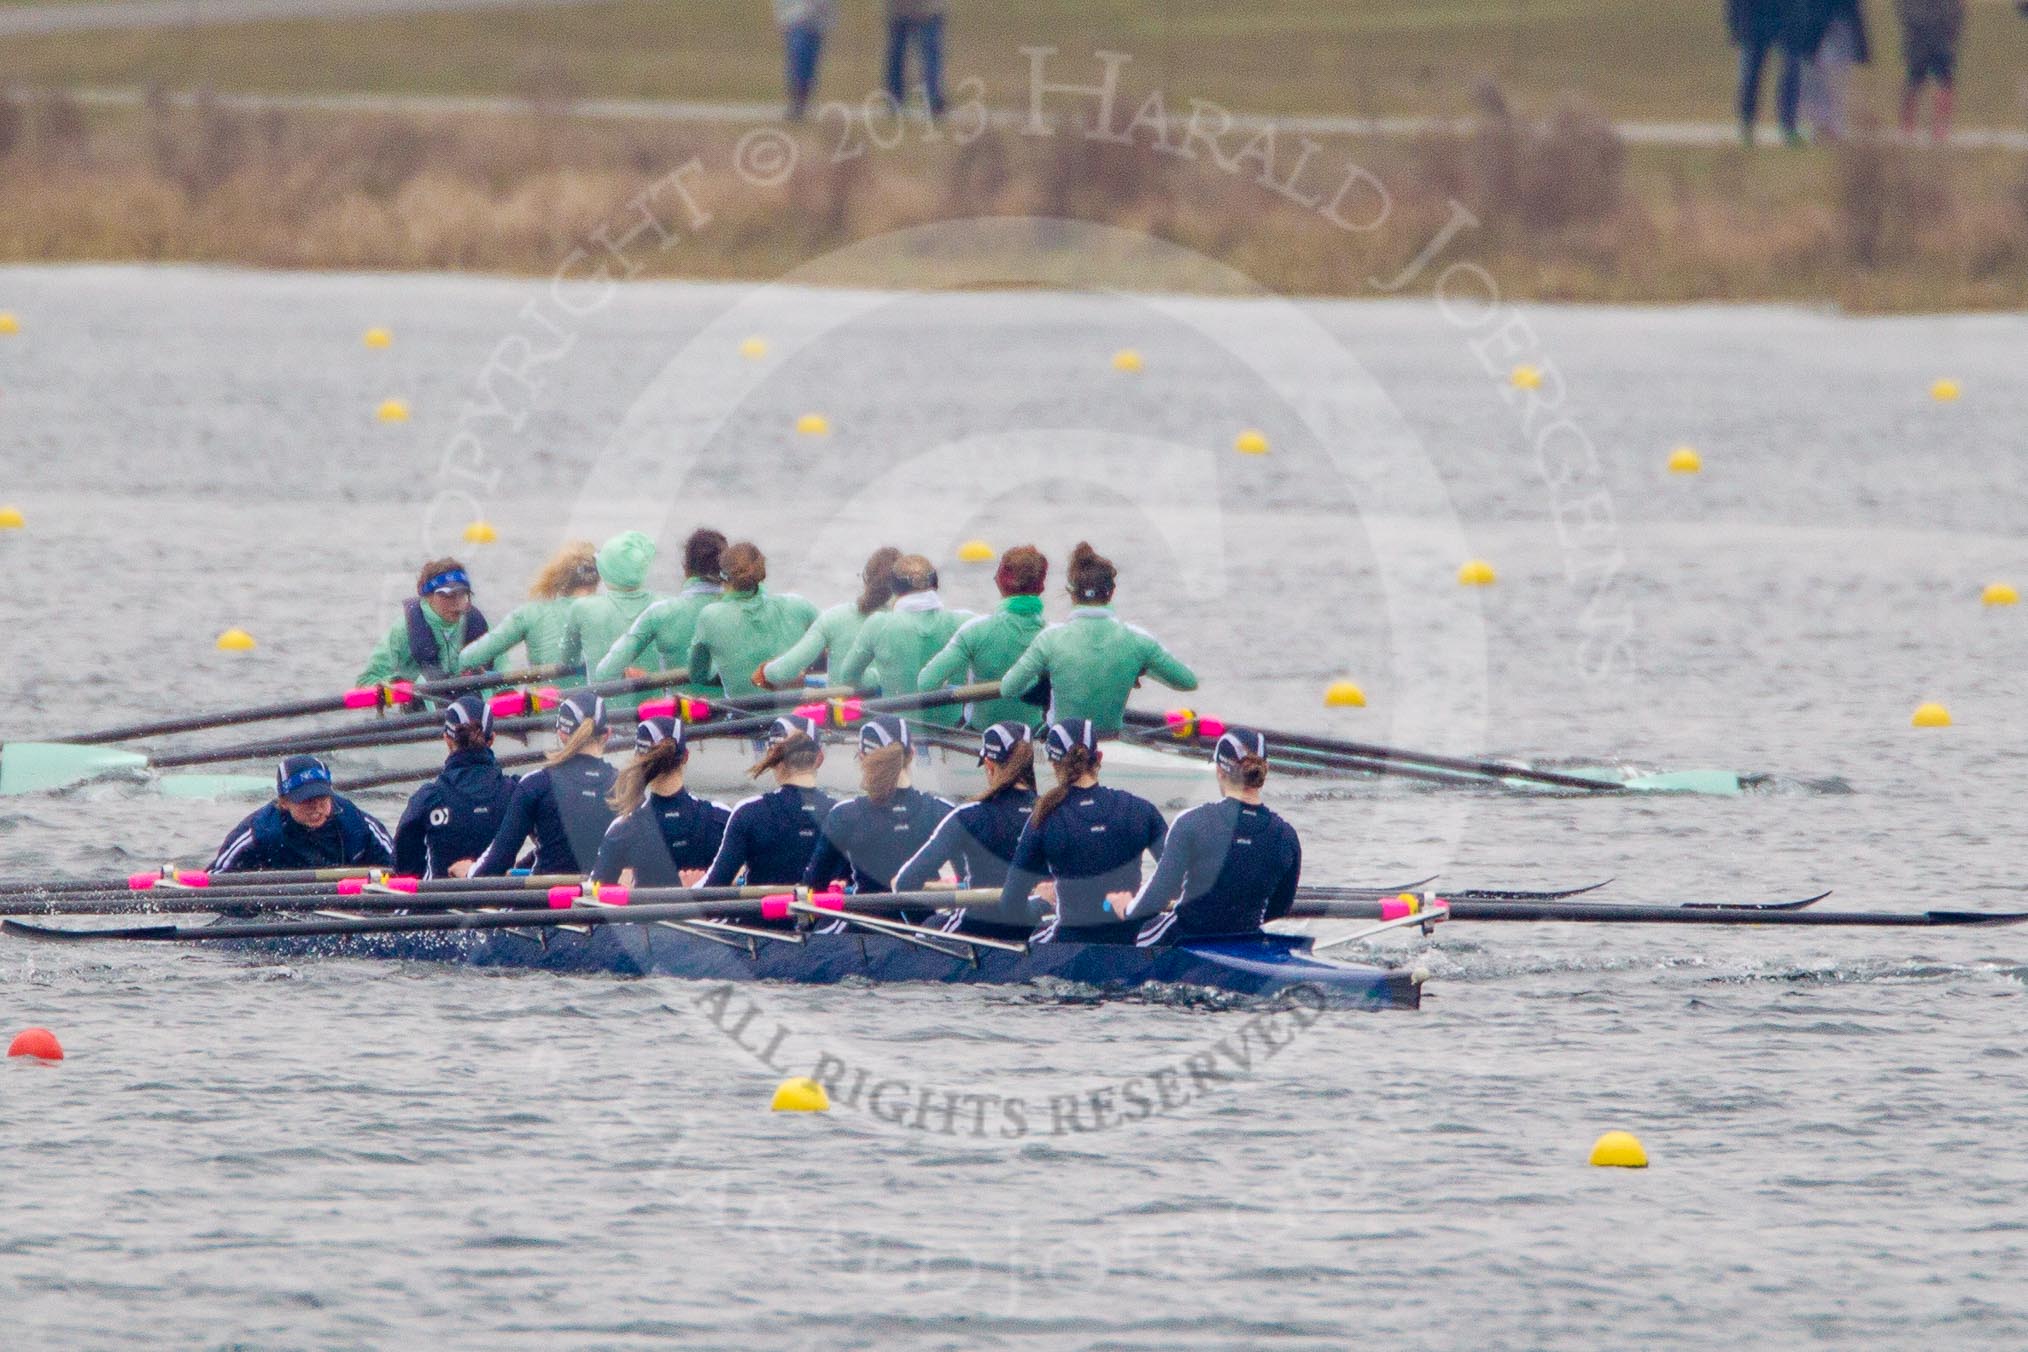 The Women's Boat Race and Henley Boat Races 2013.
Dorney Lake,
Dorney, Windsor,
Buckinghamshire,
United Kingdom,
on 24 March 2013 at 14:39, image #335